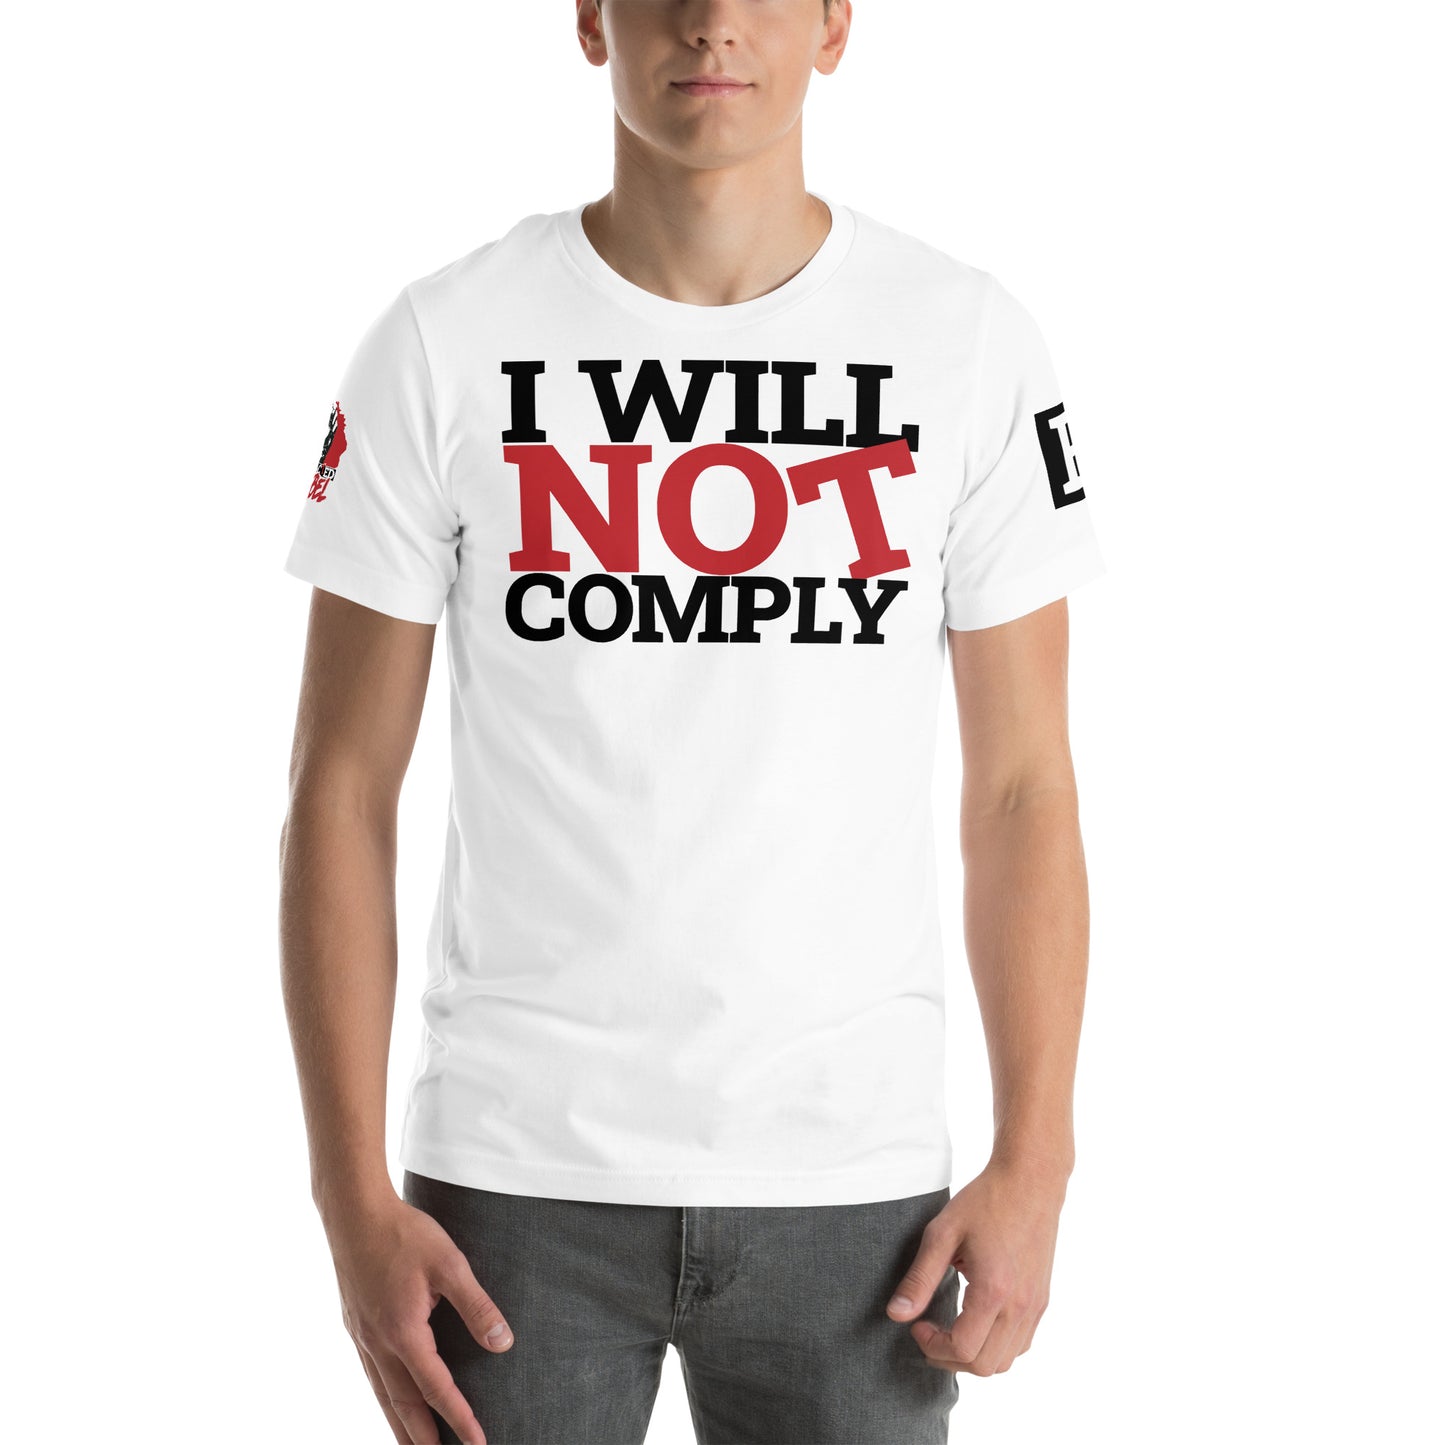 I WILL NOT COMPLY Unisex t-shirt